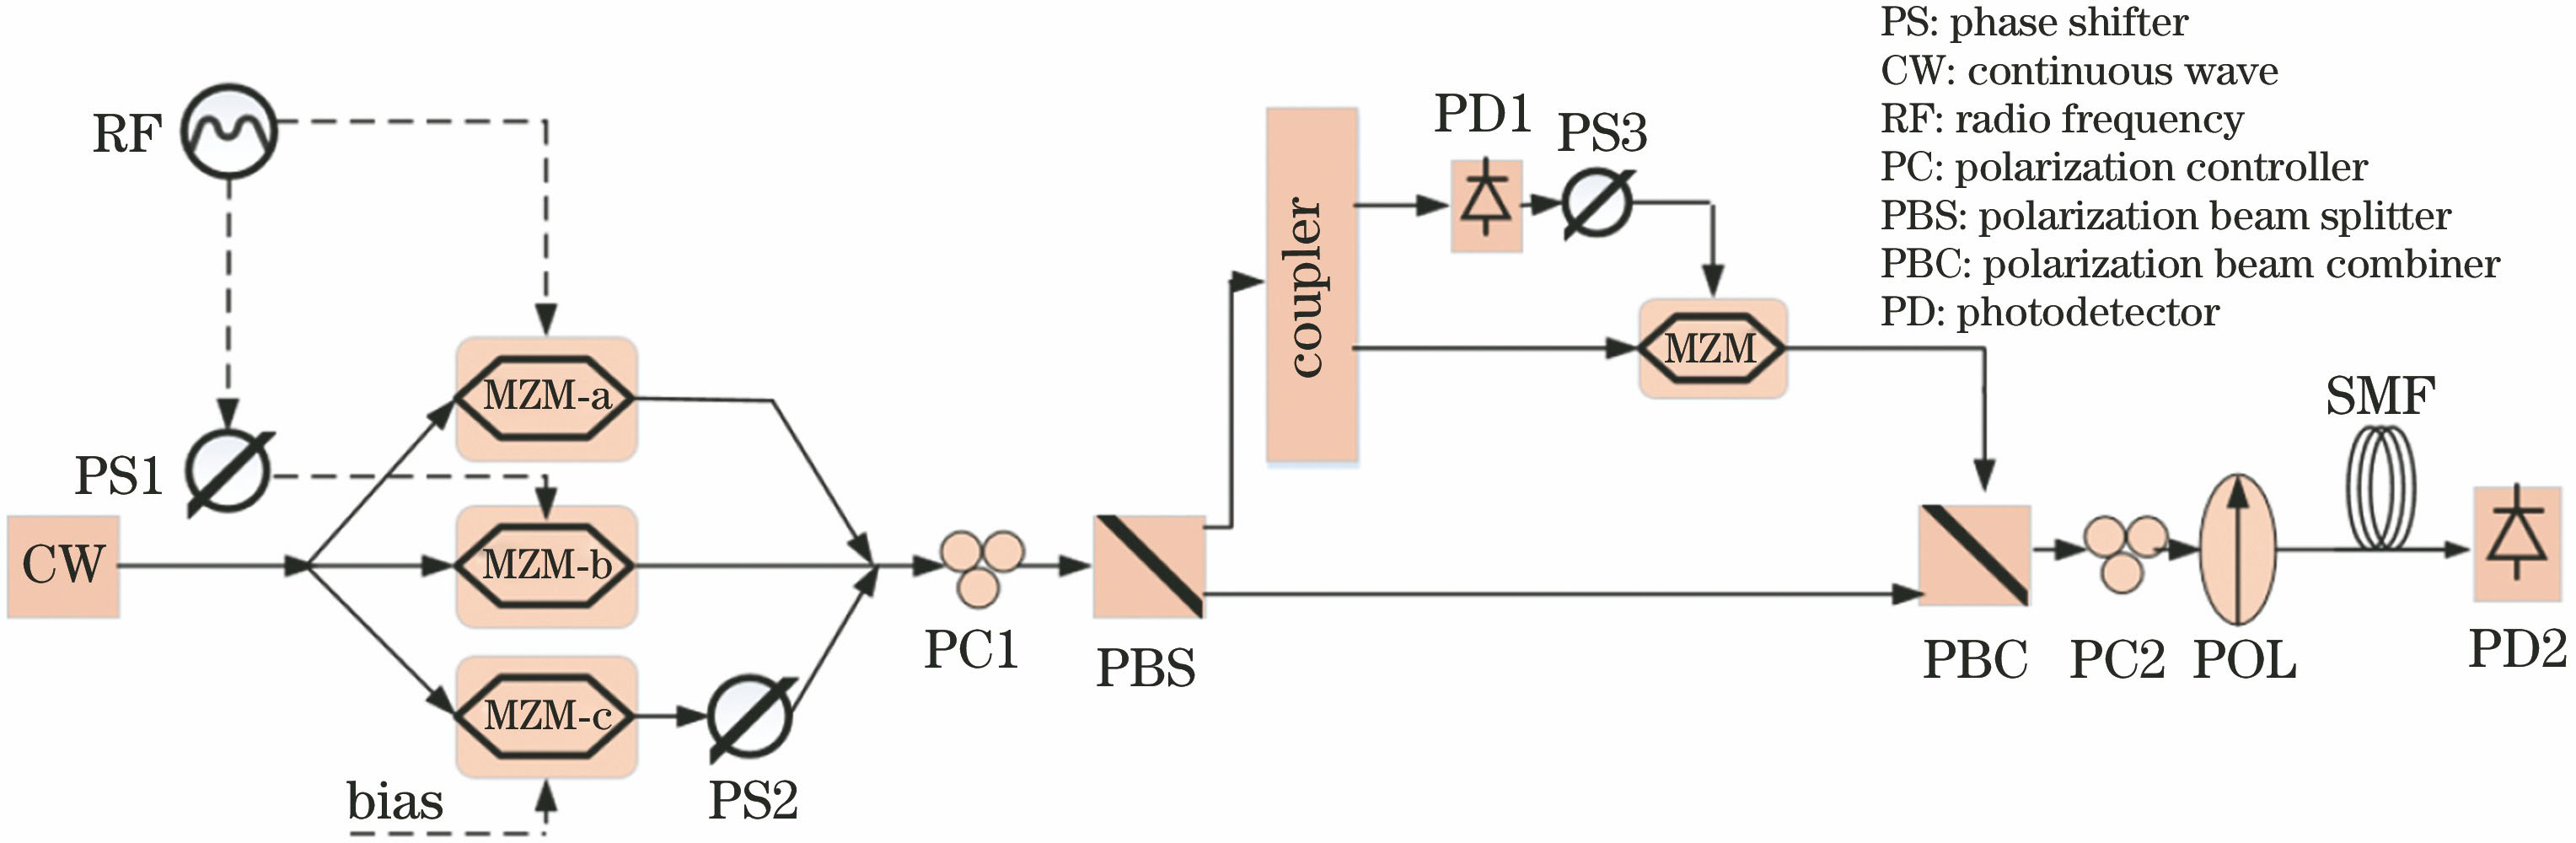 Schematic diagram of the proposed mm-wave signal generator